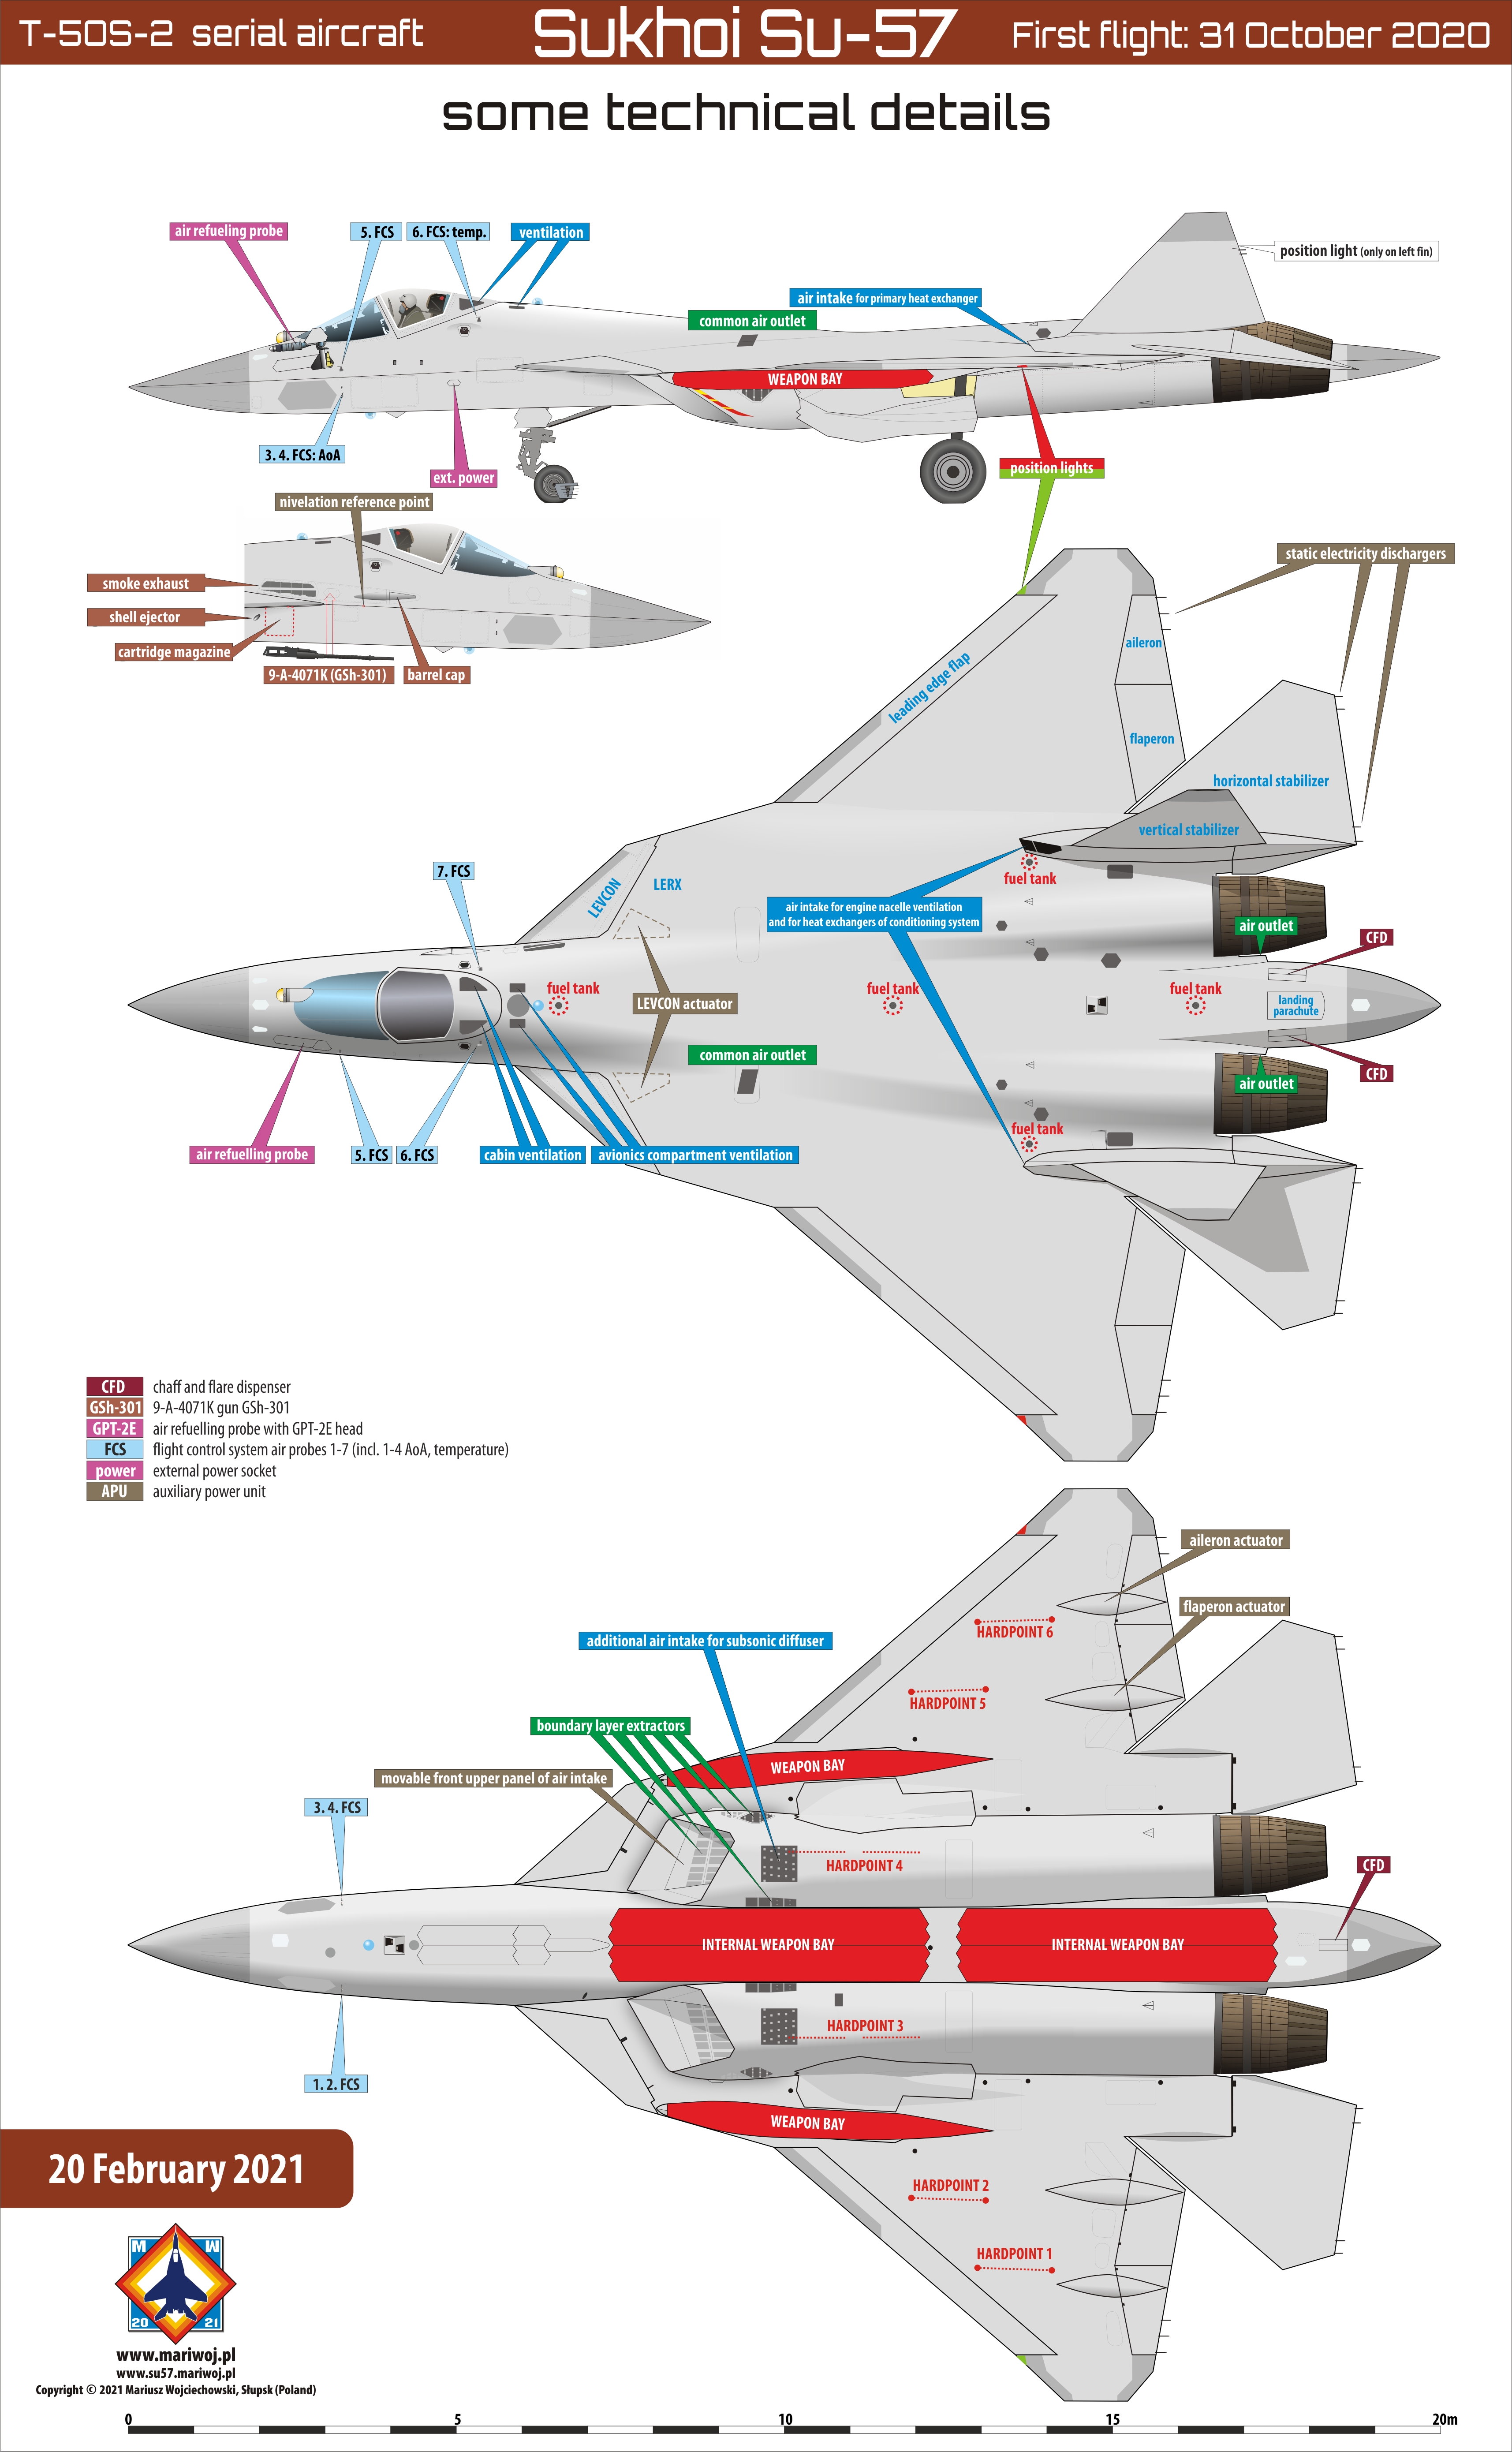 Sukhoi Su-57 some technical features